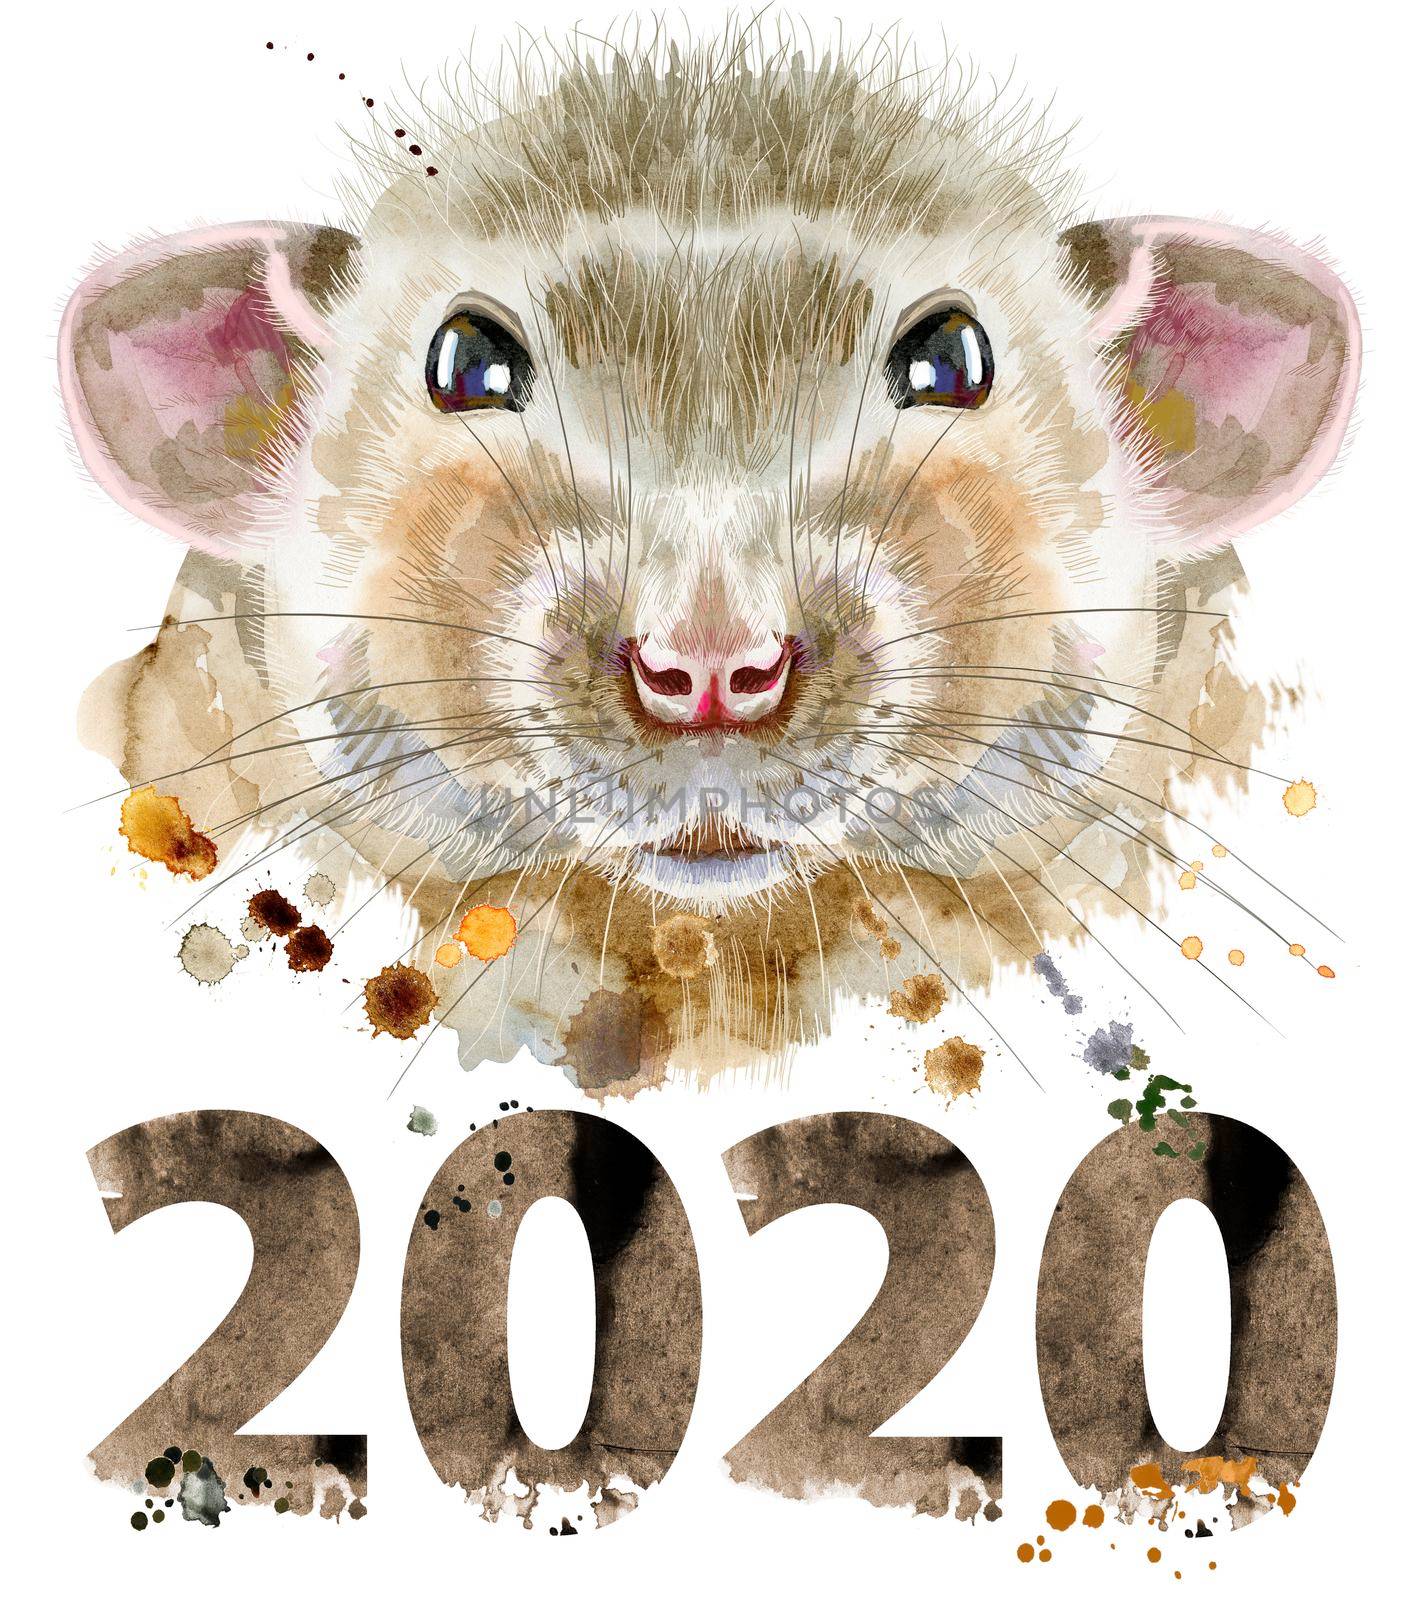 Watercolor portrait of rat with splashes and year 2020 by NataOmsk